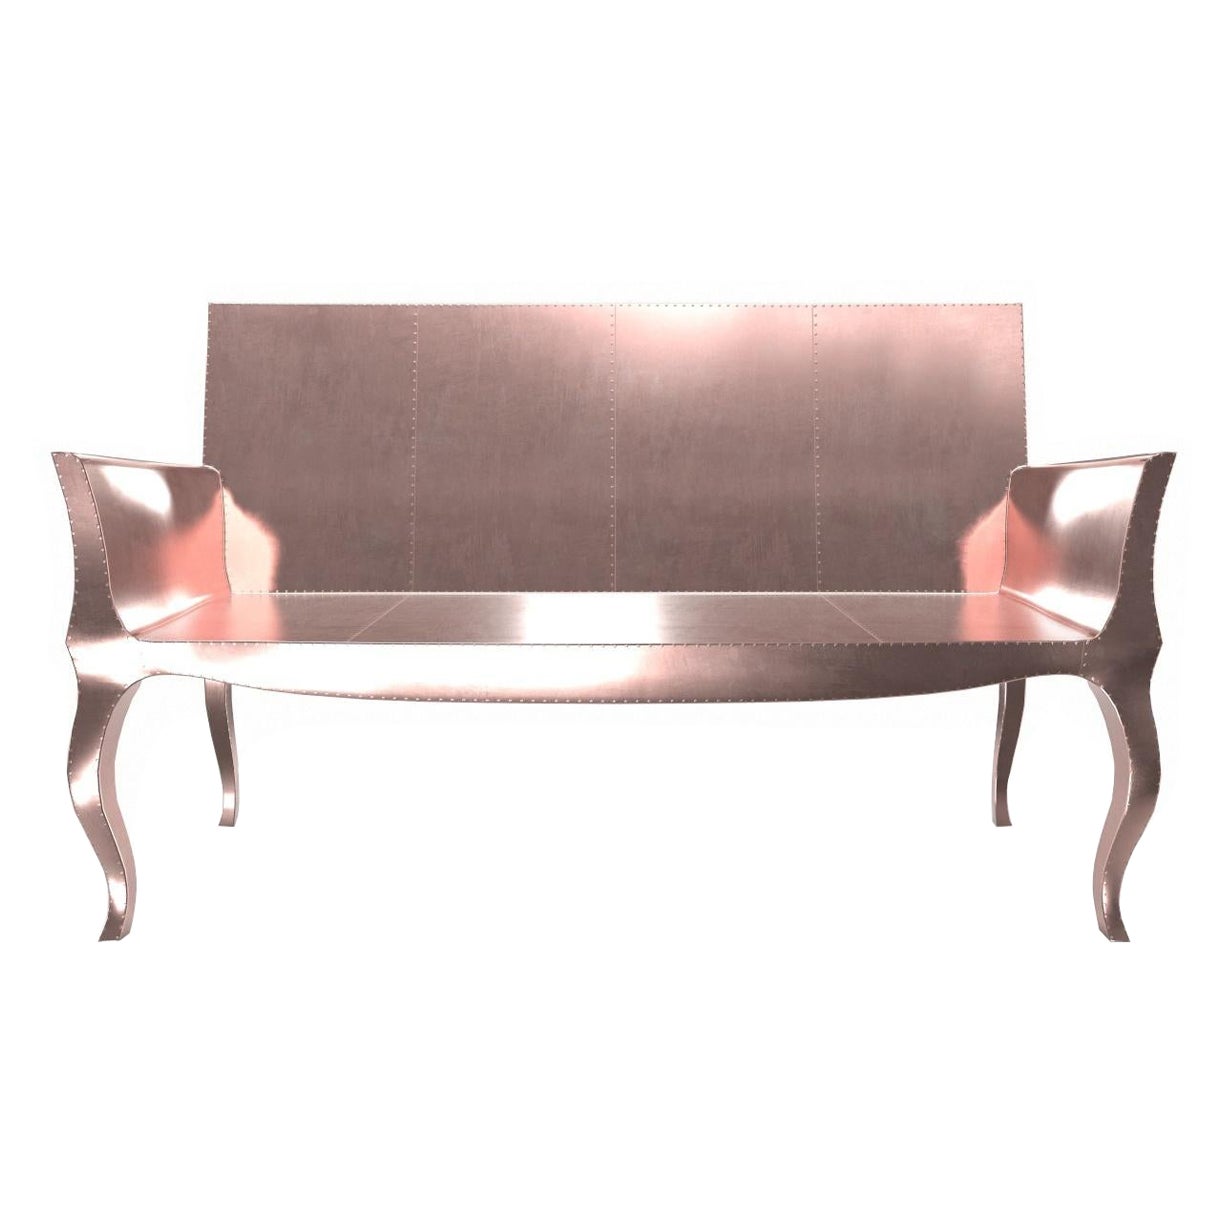 Louise Settee Art Deco Settees in Smooth Copper by Paul Mathieu for S Odegard For Sale